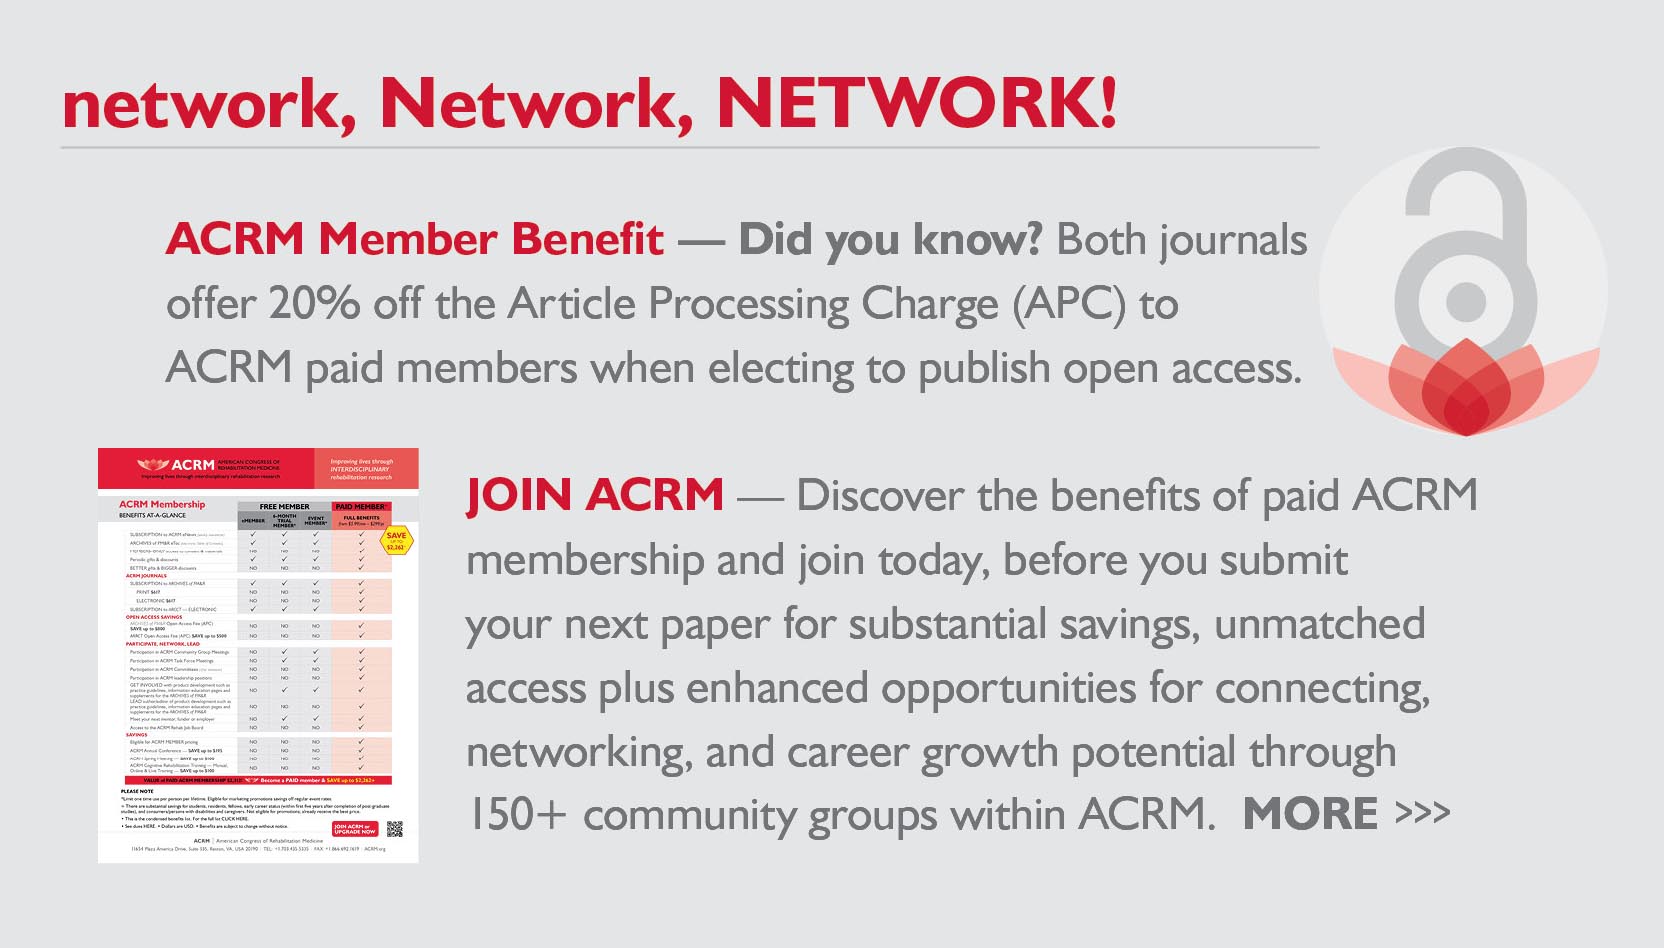 network, Network, NETWORK! | ACRM Member Benefit – Did you know? Both journals offer 20% off the Article Processing Charge (APC) to ACRM paid members when electing to publish open access. | JOIN ACRM – Discover the benefits of paid ACRM membership and join today, before you submit your next paper for substantial savings, unmatched access plus enhanced opportunities for connecting, networking, and career growth potential through 150+ community groups within ACRM. MORE>>>